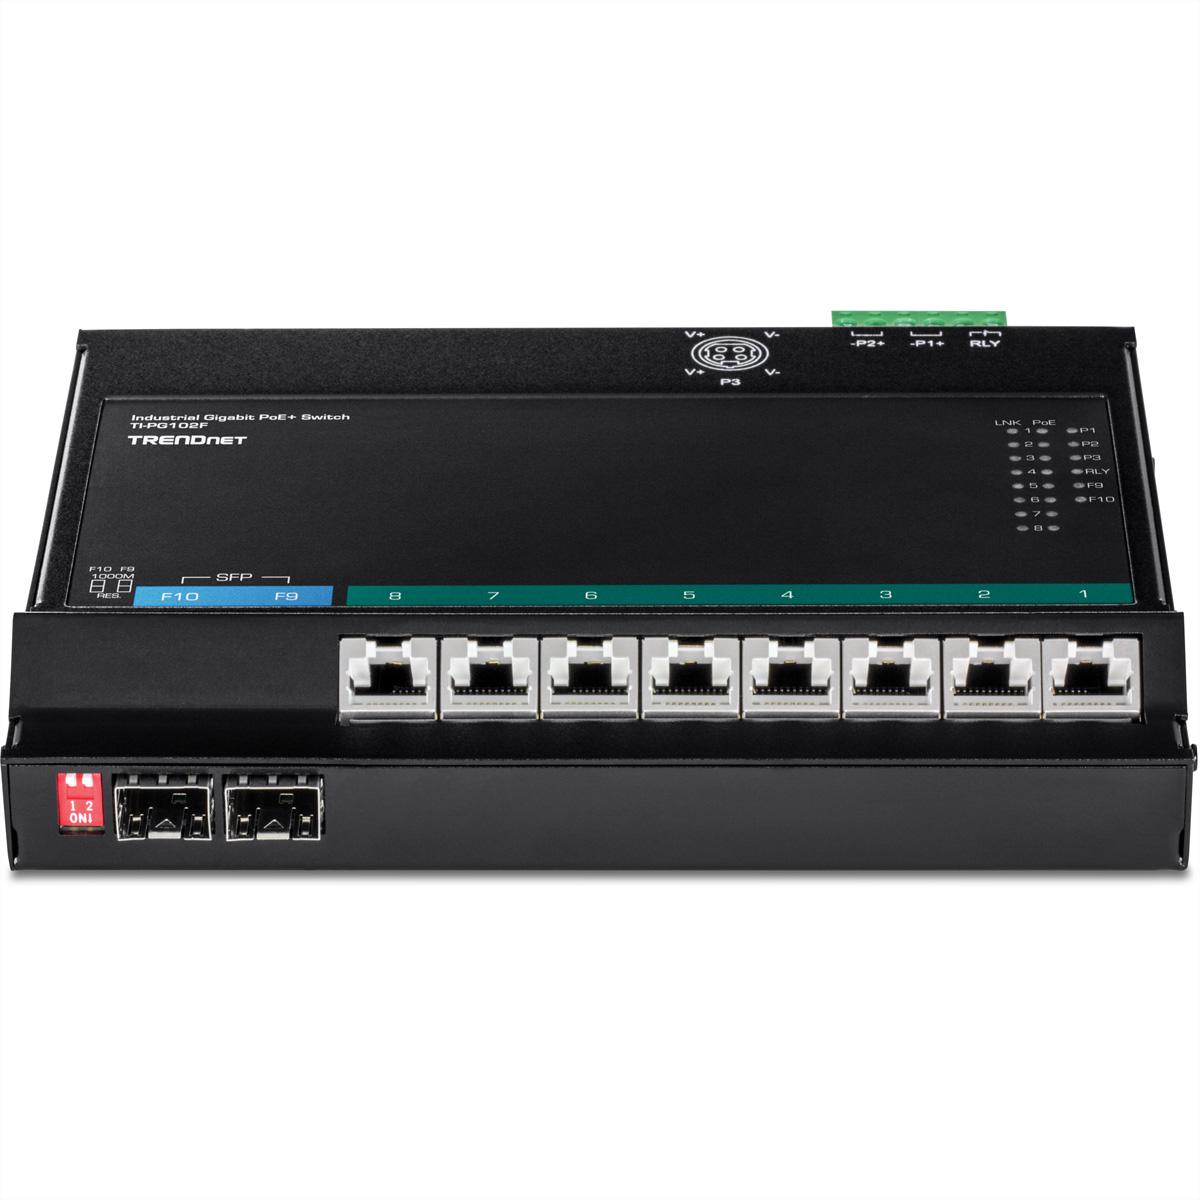 PoE+ Networking 10-Port Access TI-PG102F Industrial TRENDNET Industrie Front Wall-Mount Switch